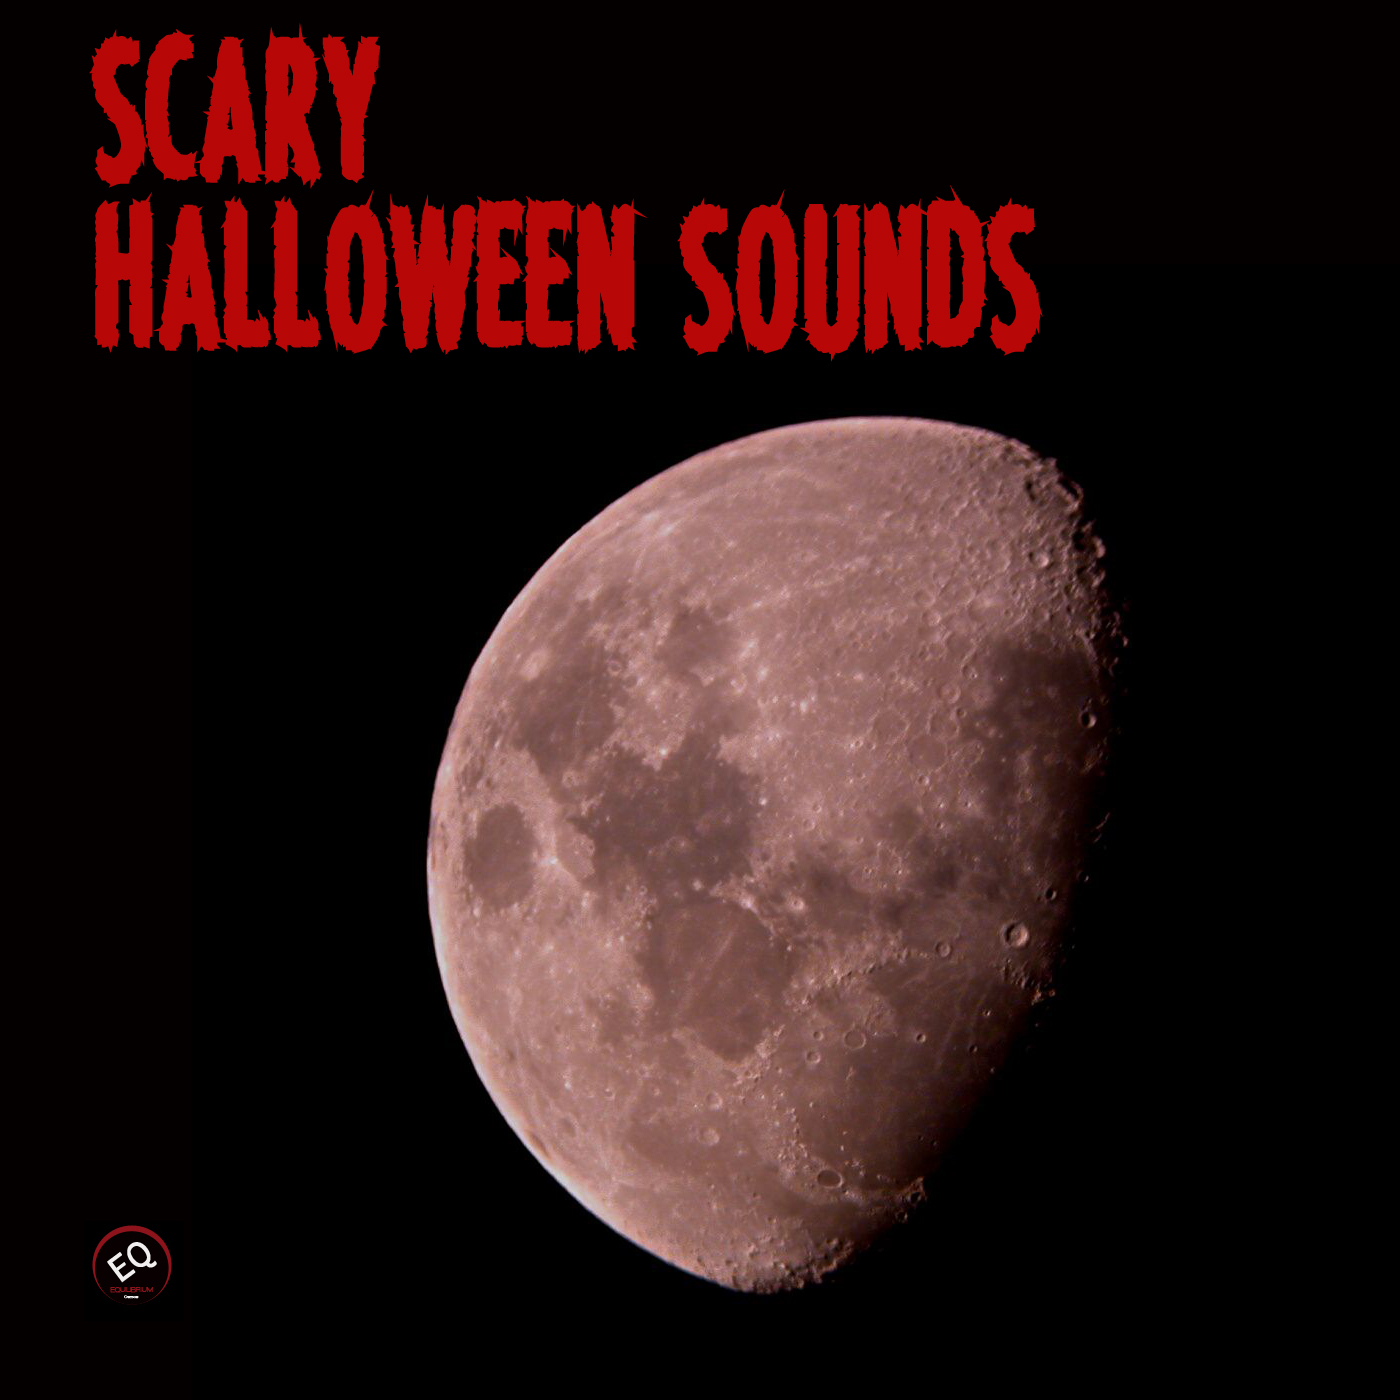 Scary Halloween Sounds - Halloween Music, Scary Music